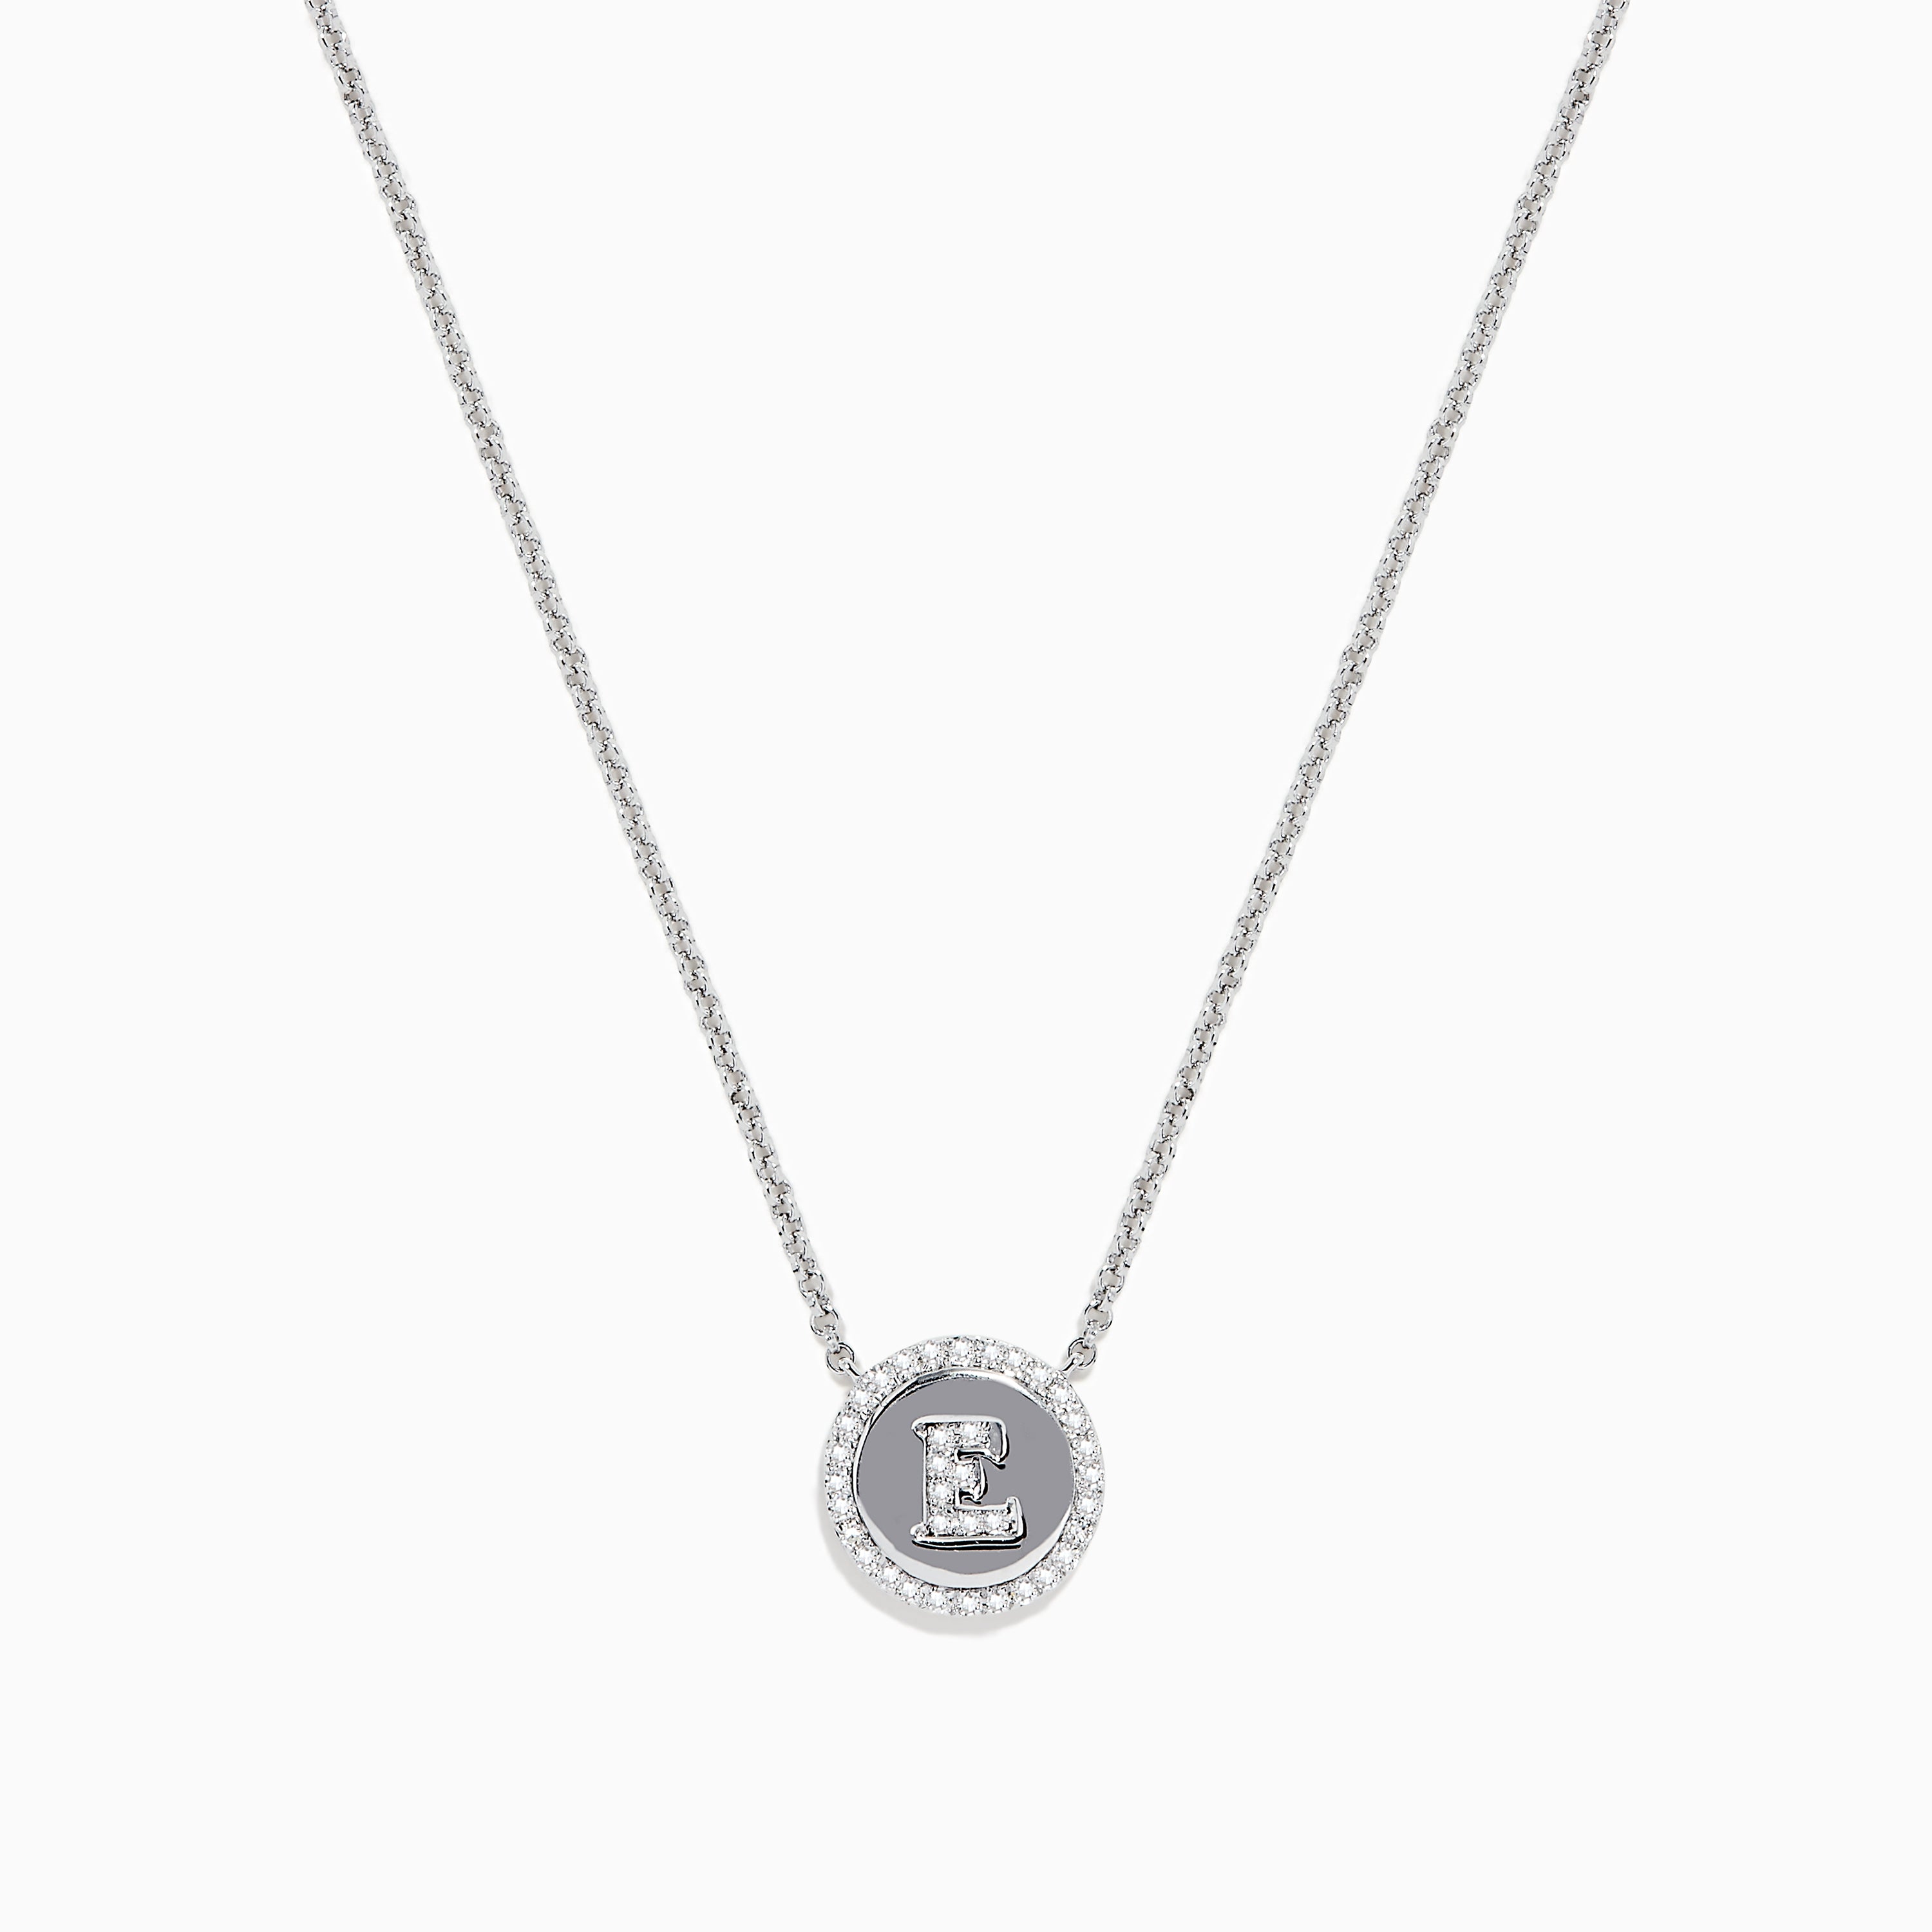 Effy 925 Sterling Silver Diamond Initial Letter "E" Necklace, 0.15 TCW